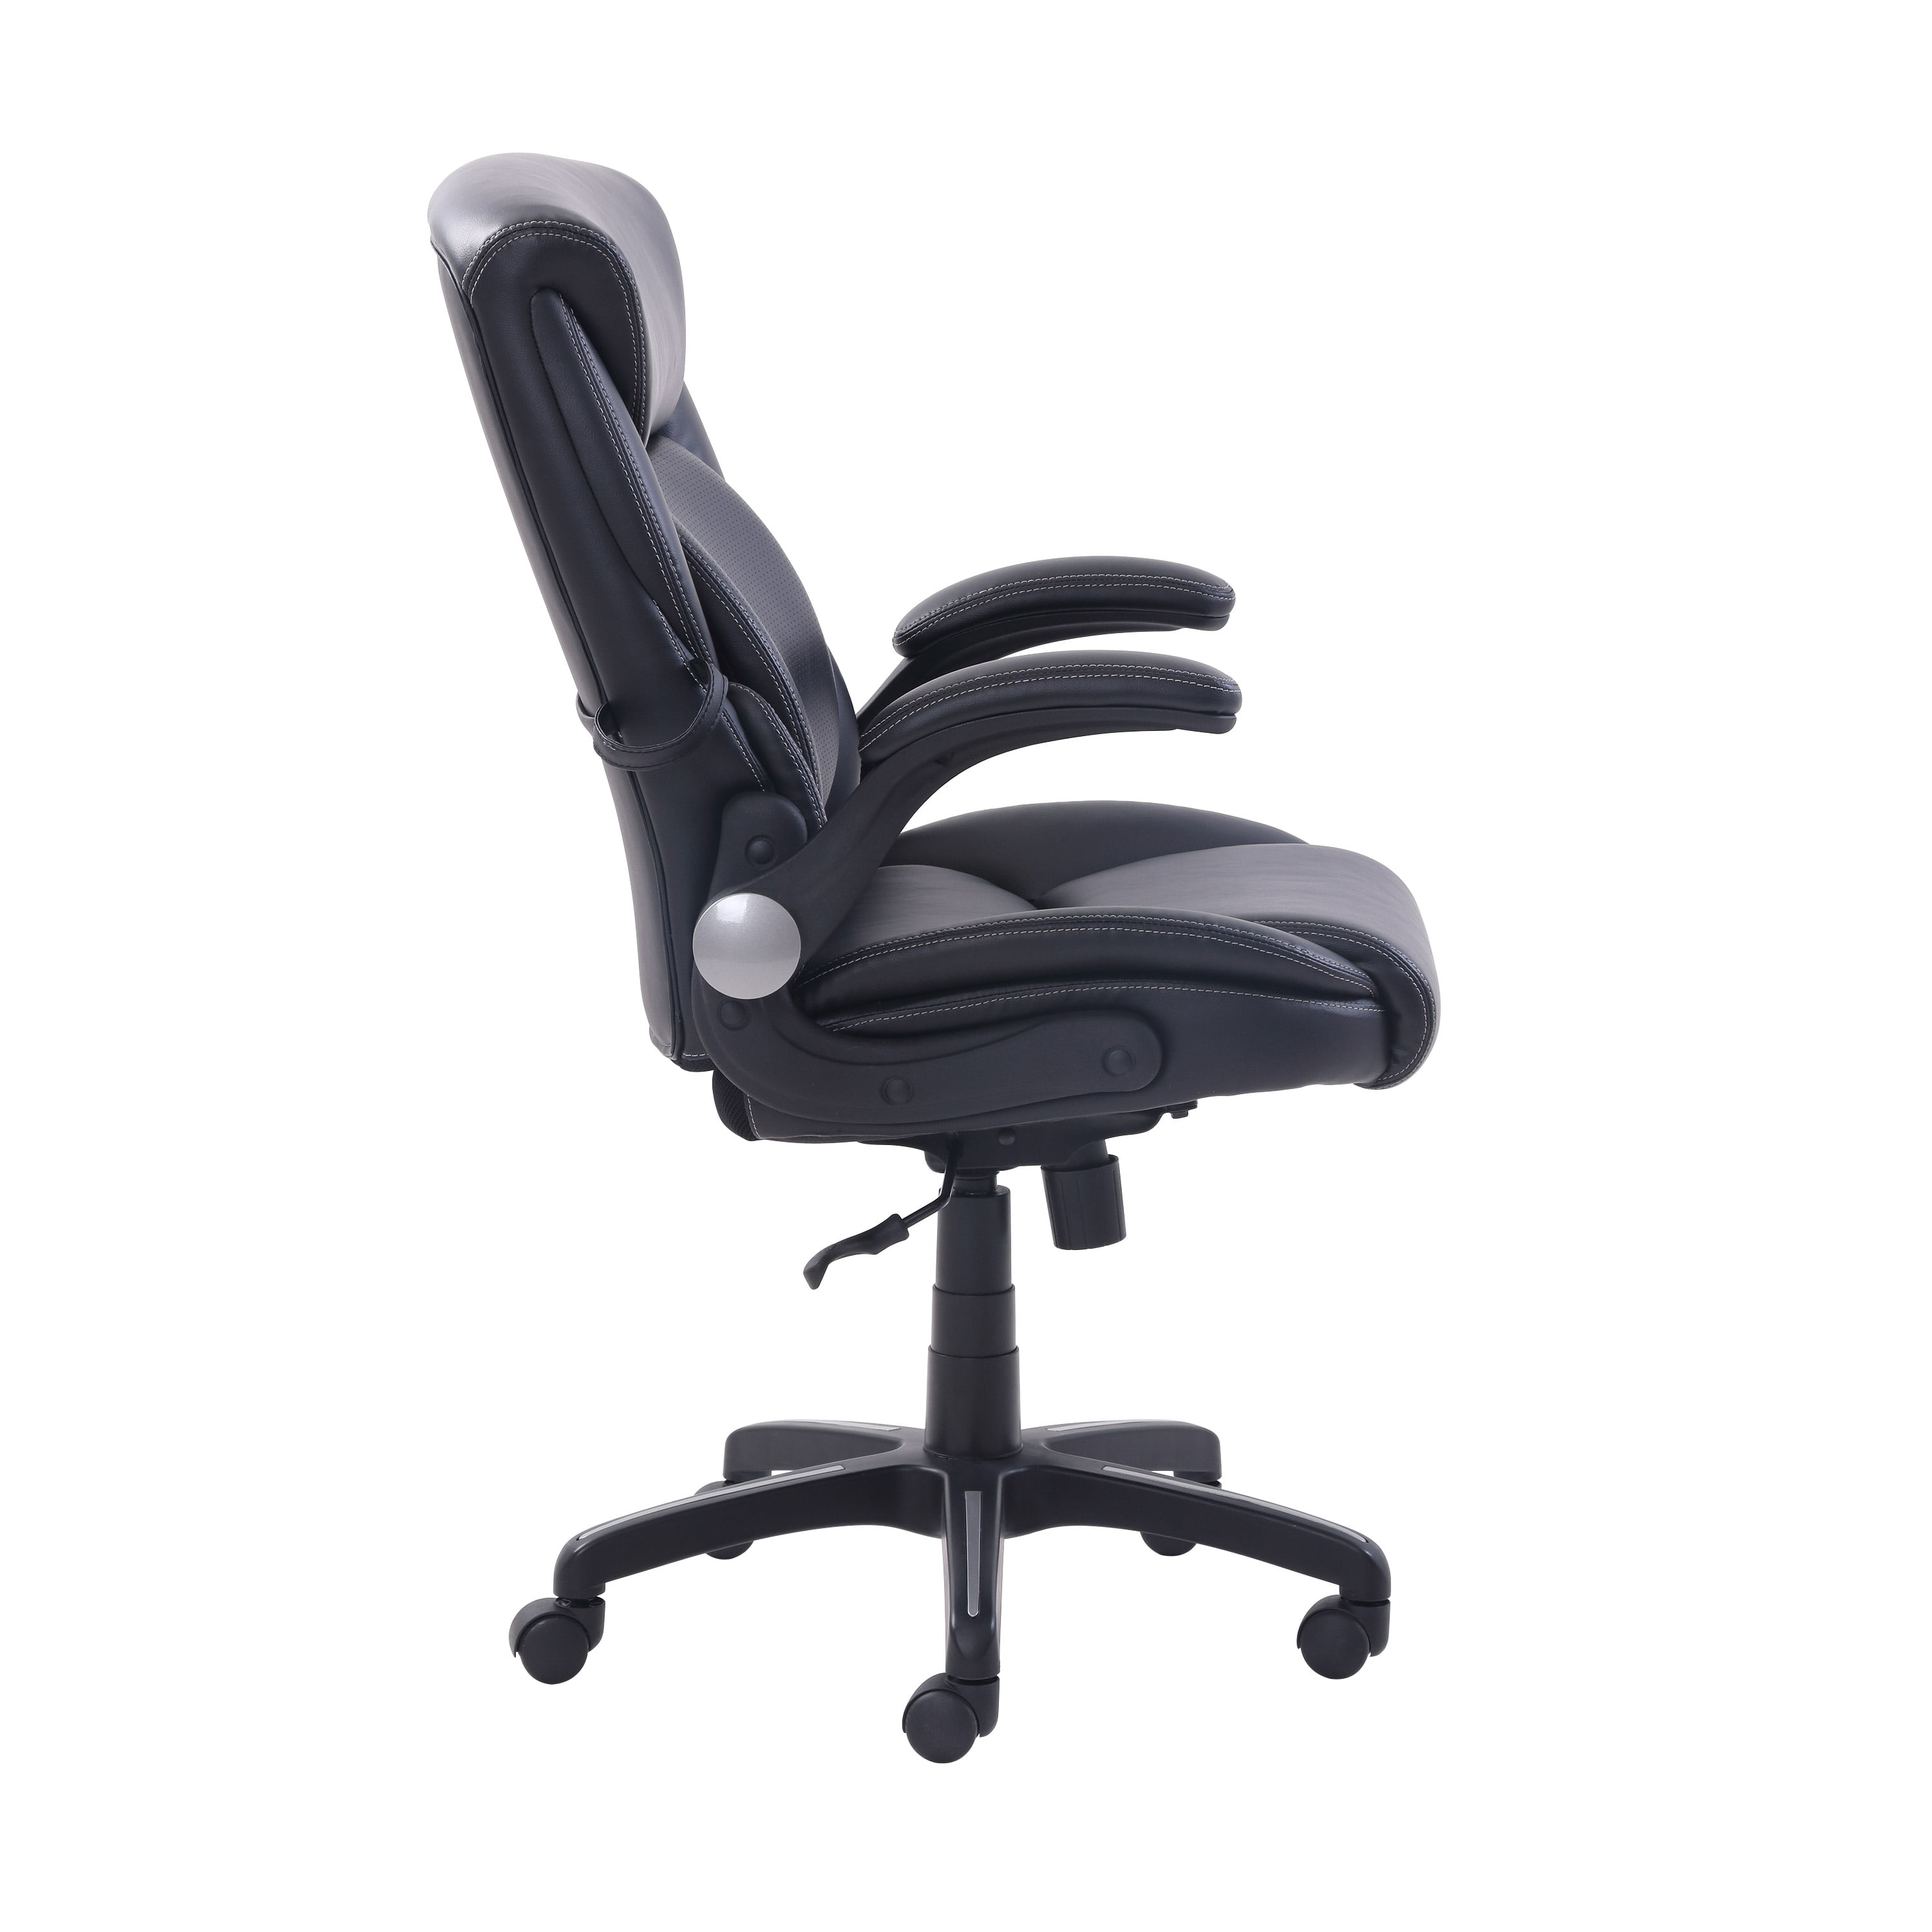 Black Bonded Leather Serta Office Chair with Lumbar Support